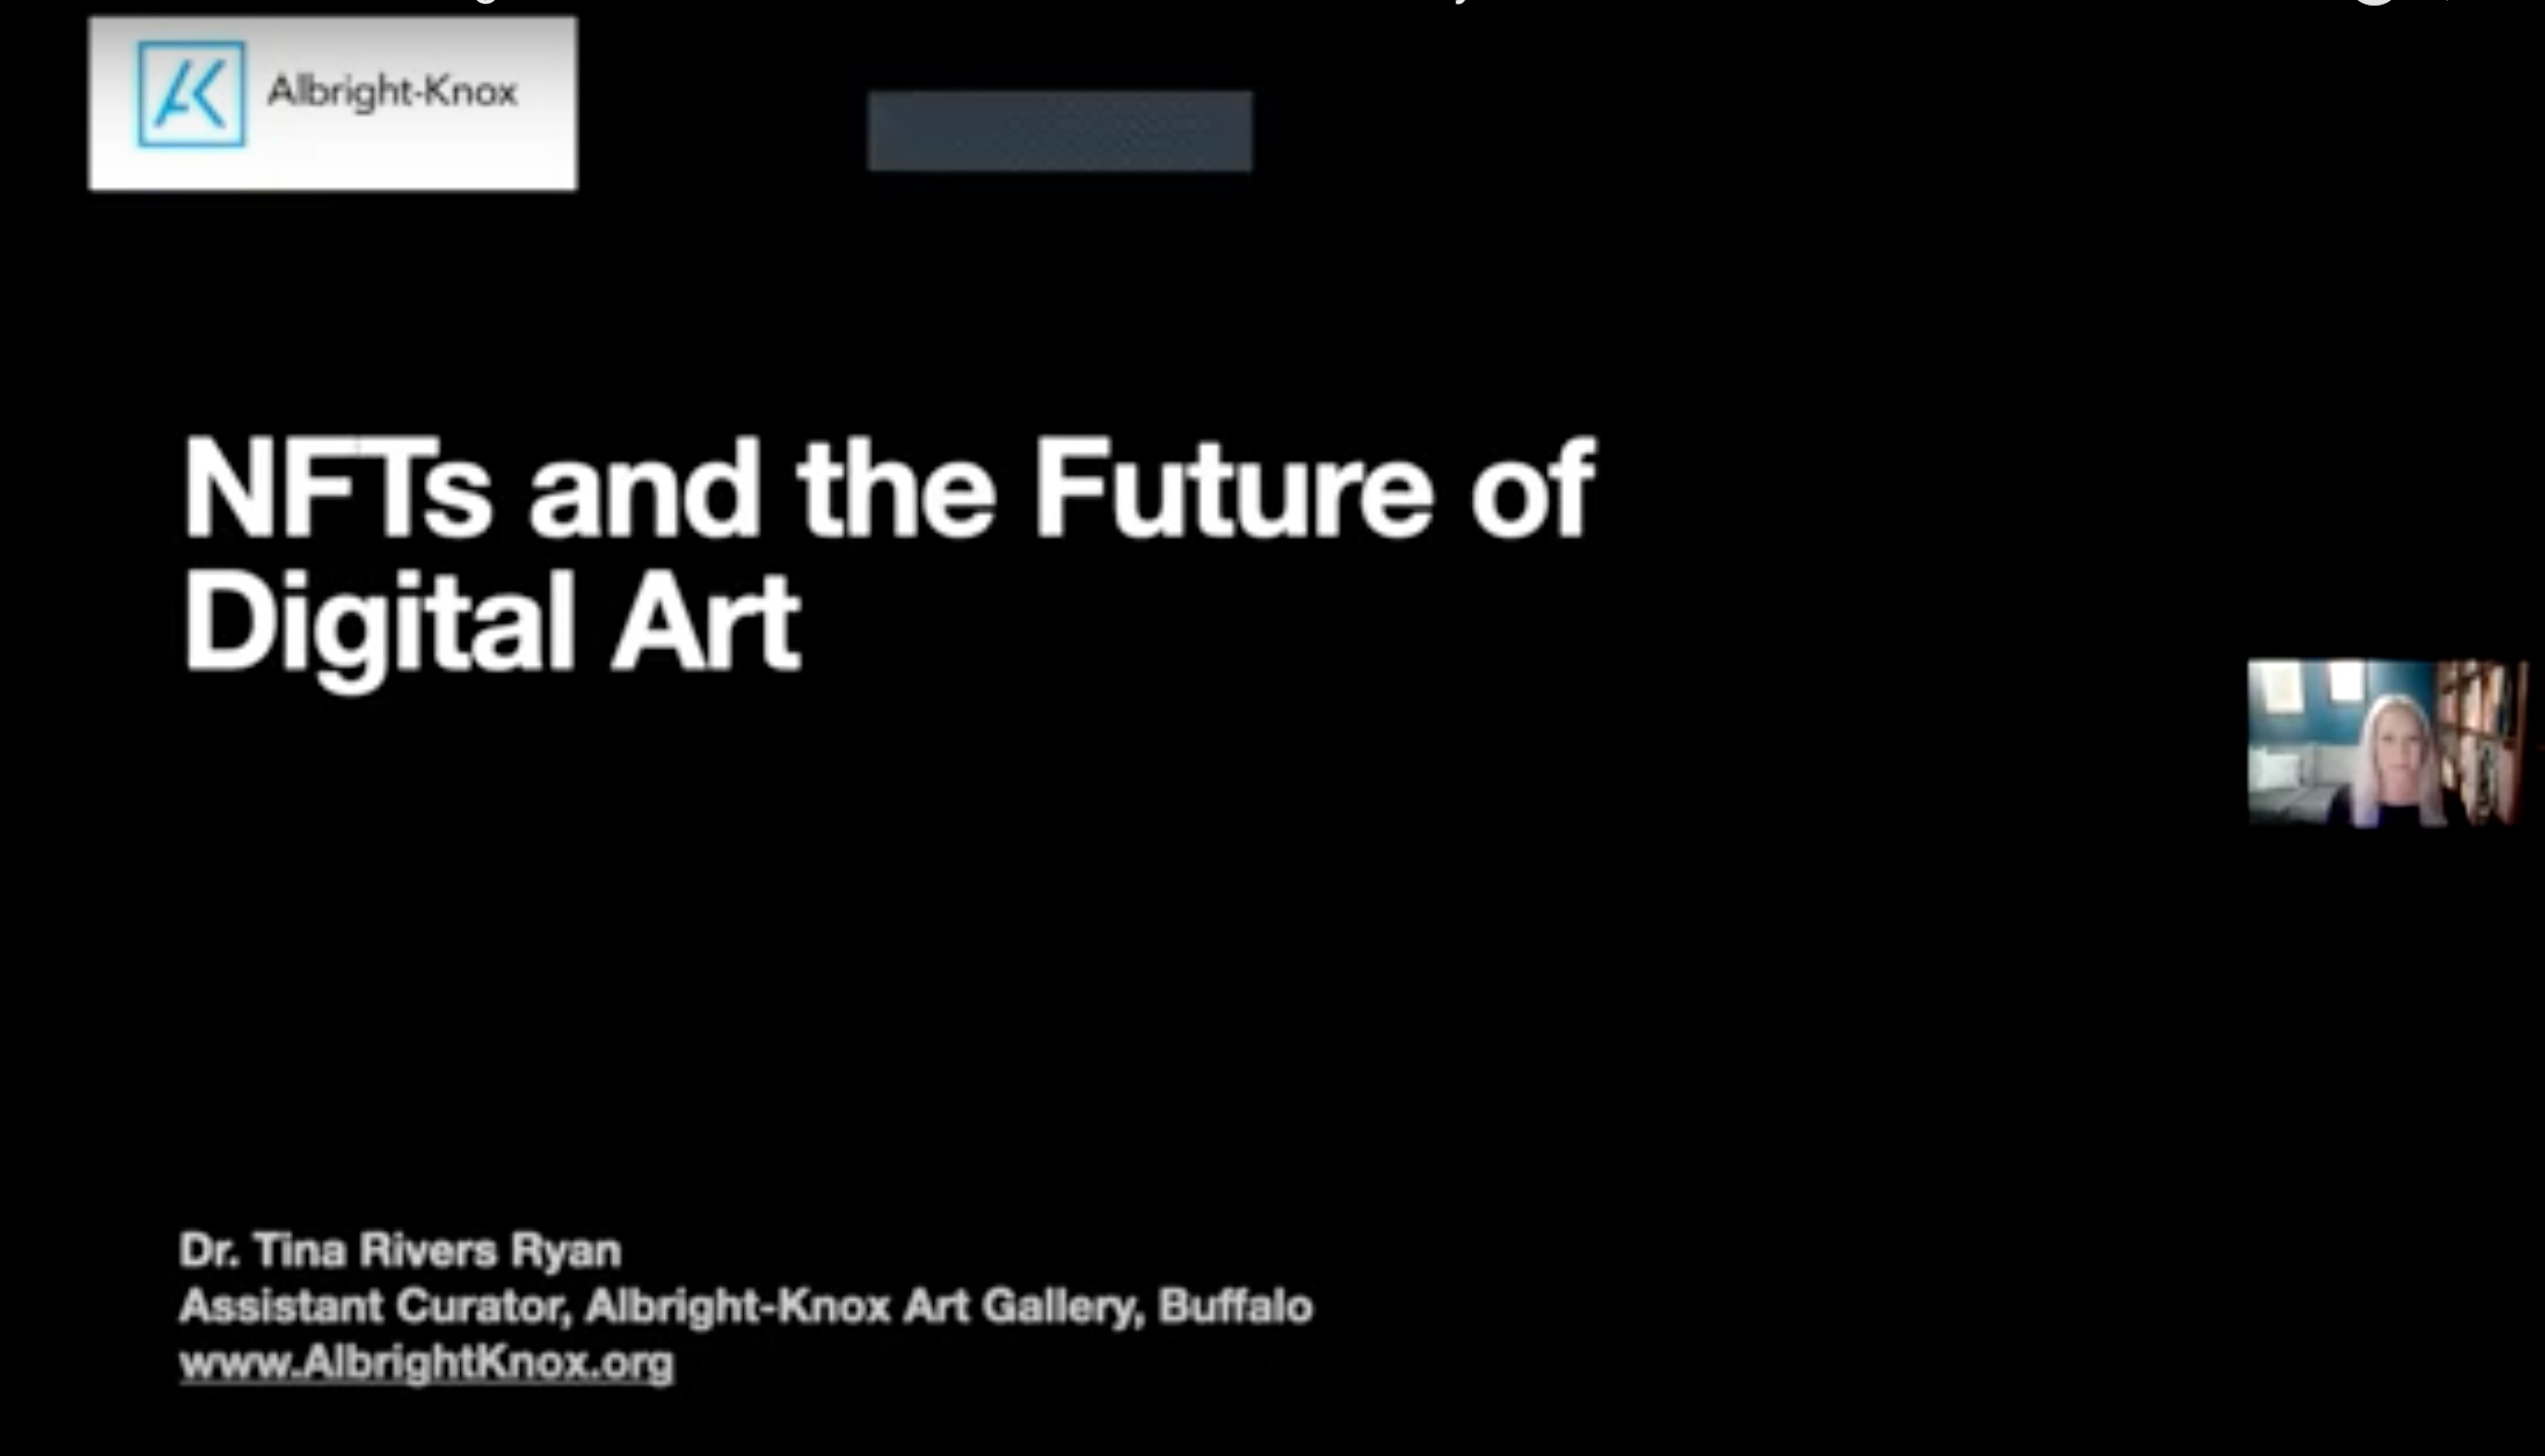 Screen recording of the Buffalo AKG Art Museum's webinar. At the top left of the page is a white banner with the text 'Albright-Knox' with the title of the webinar 'NFTs and the Future of Digital Art' in the center. On the right a white woman with light hair appears on the screen.